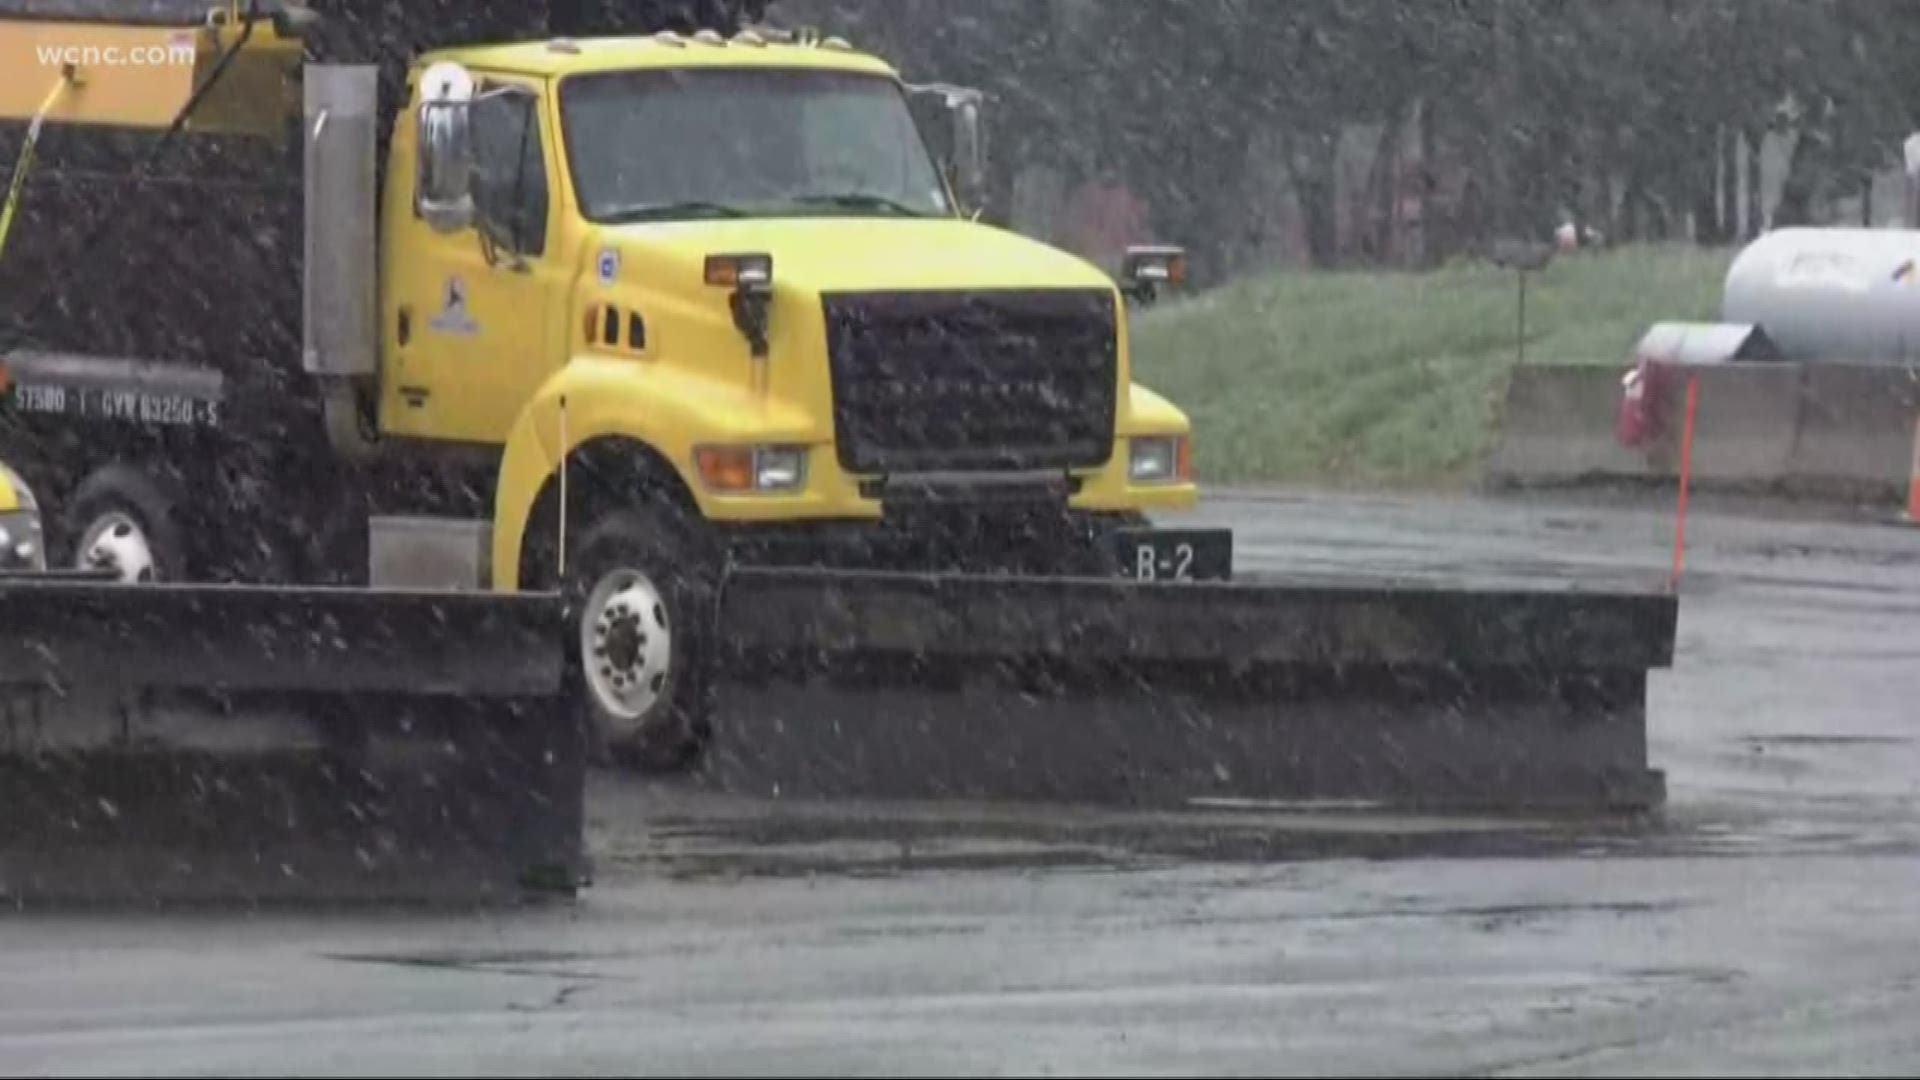 The North Carolina Department of Transportation will work to clear the roads as snow falls across the Carolinas.